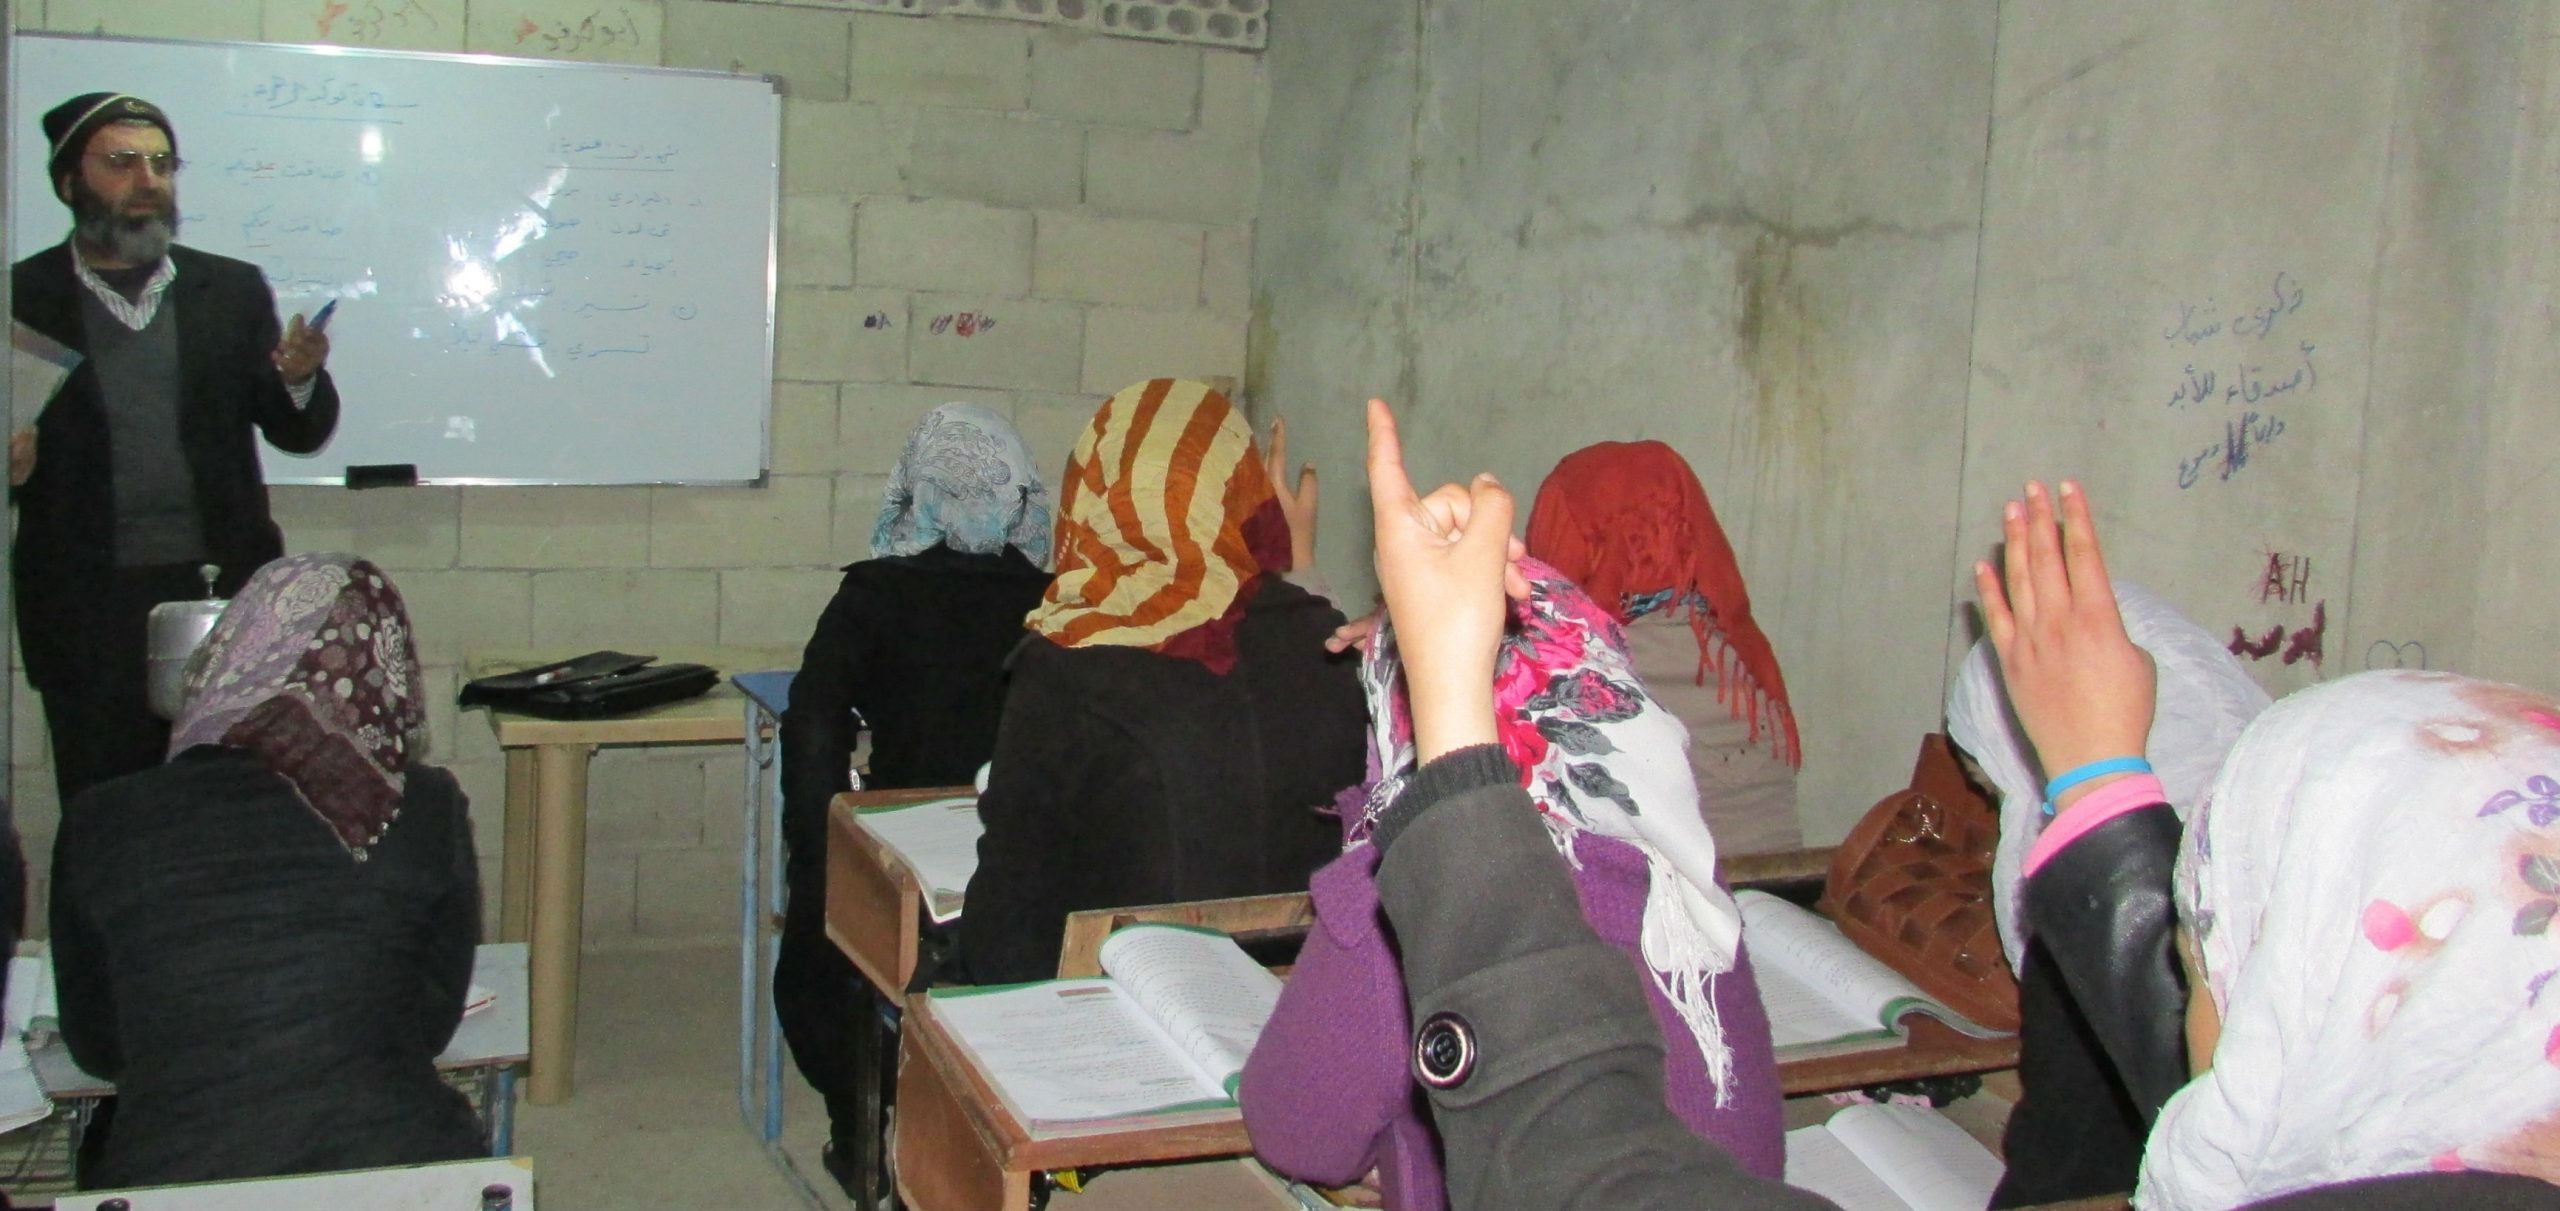 Syria’s future is at risk without educationimage